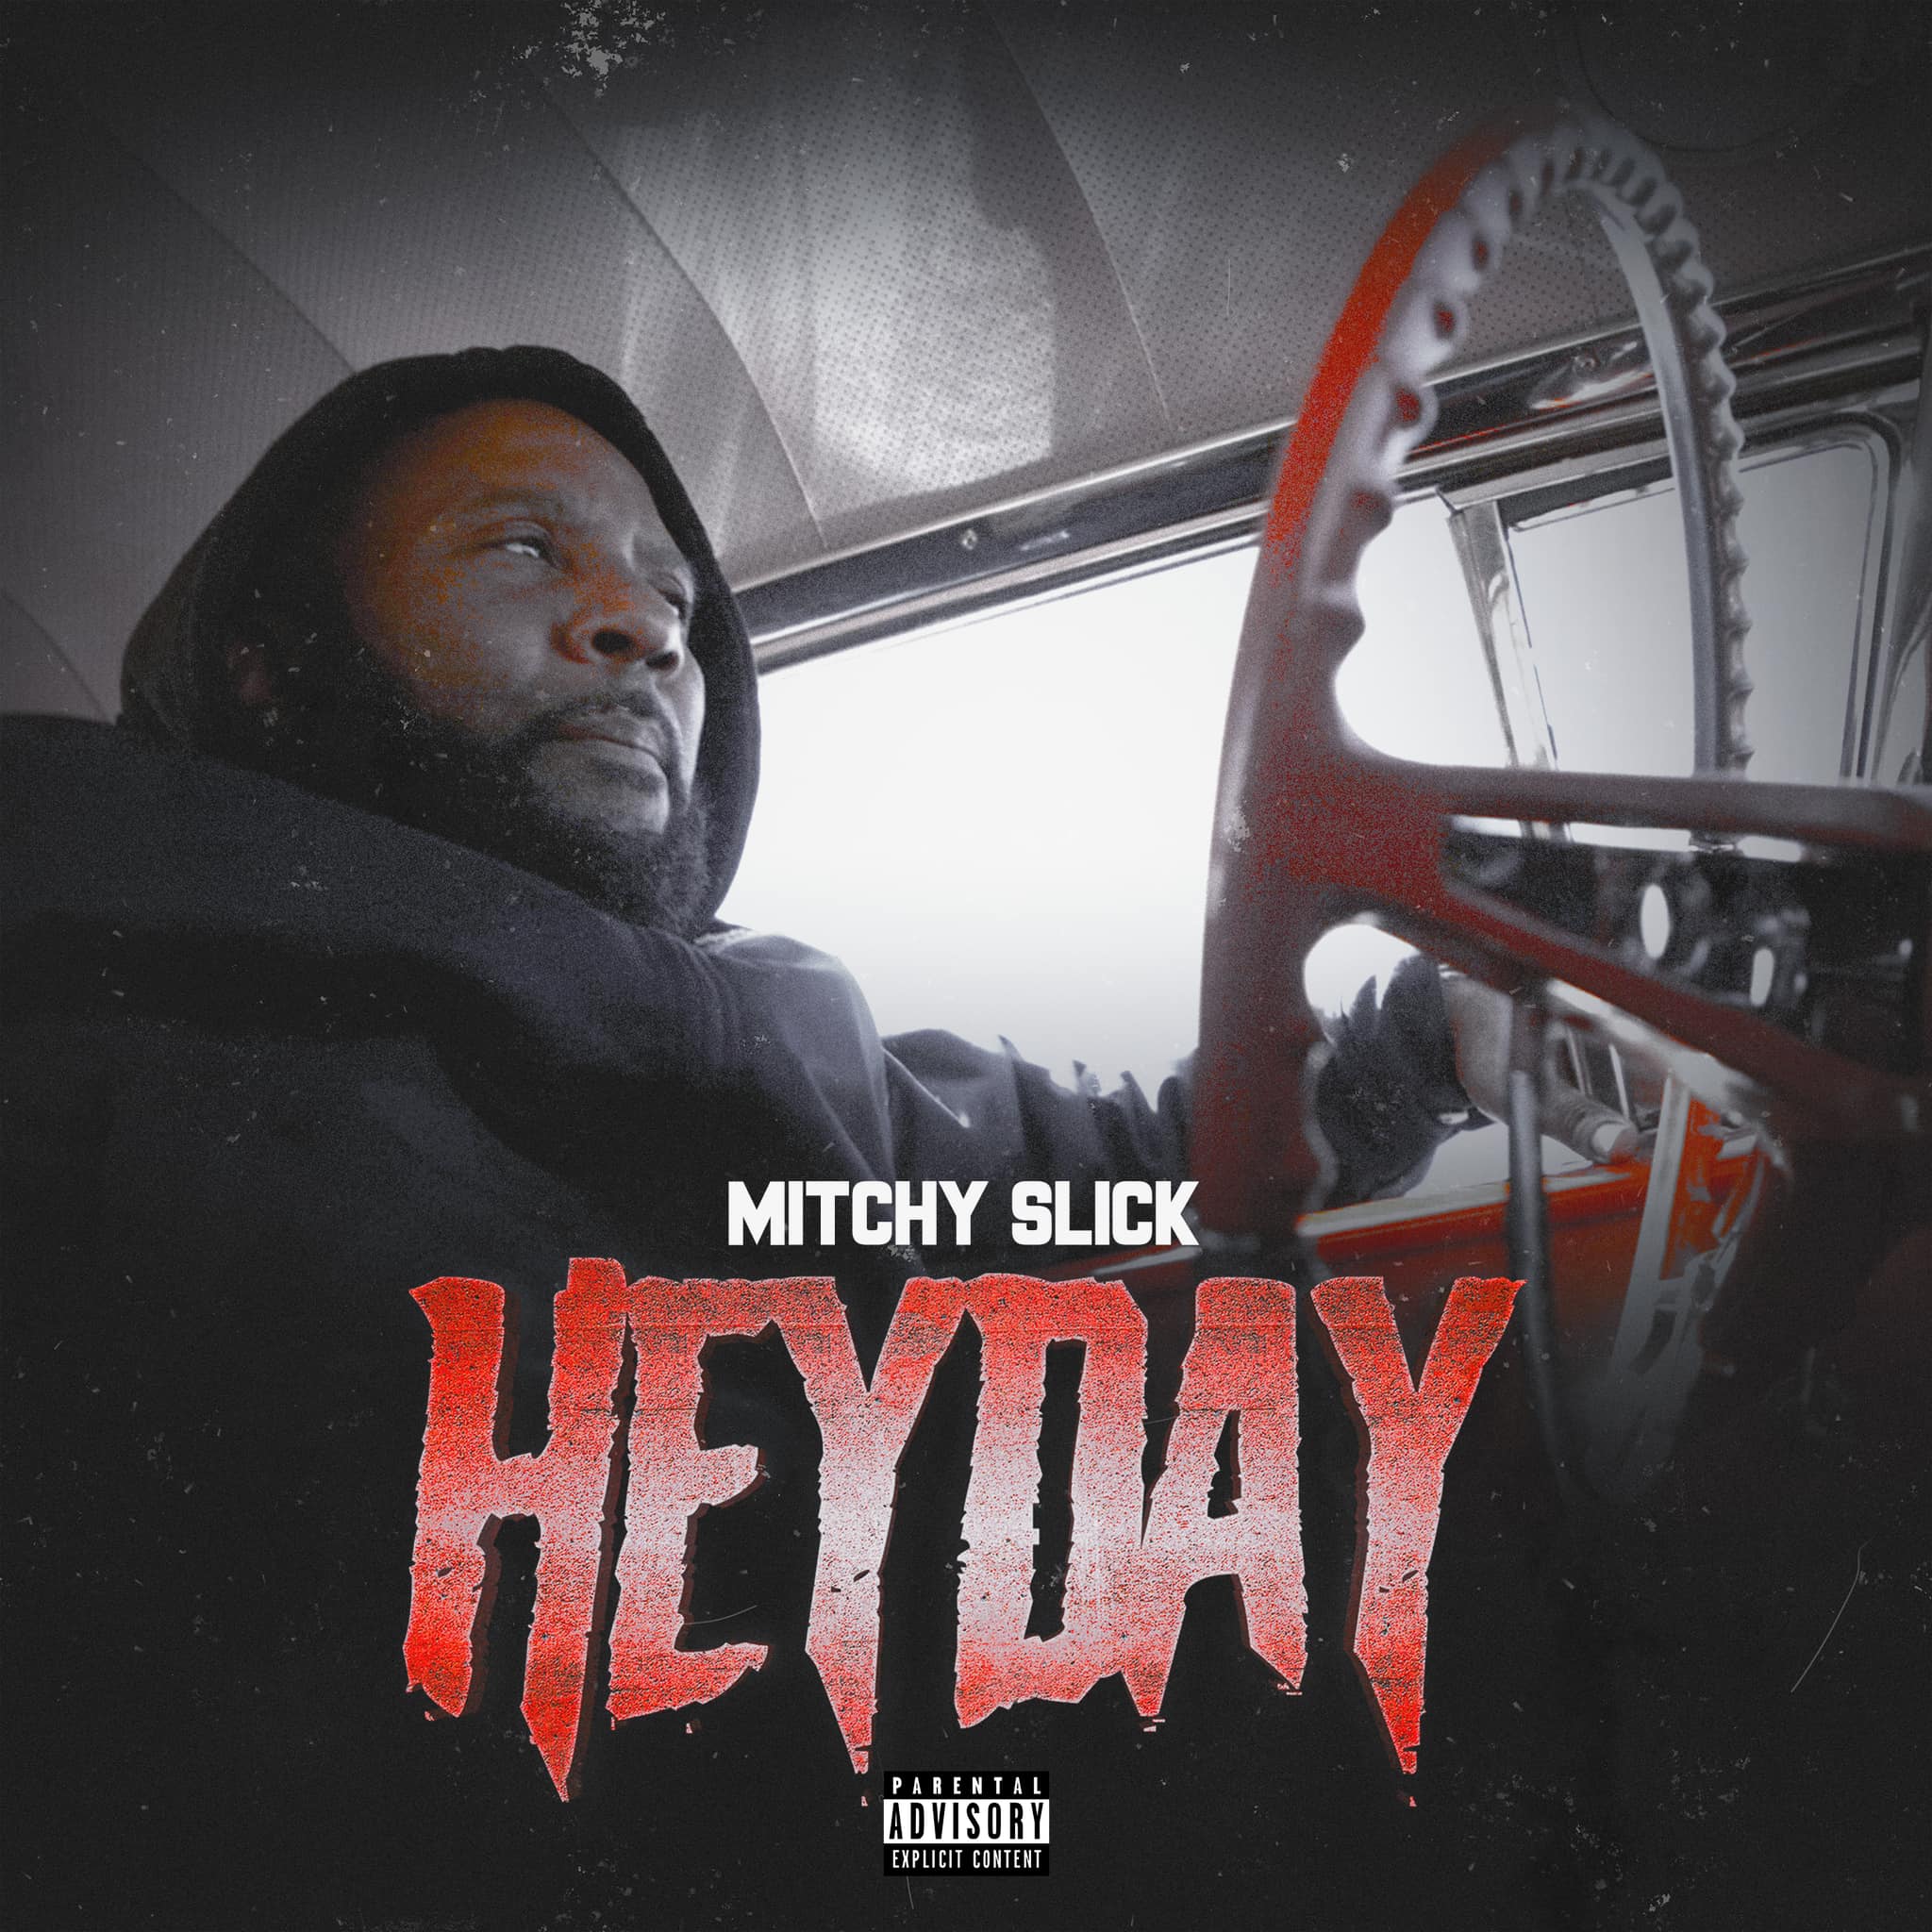 Mitchy Slick – Heyday (Official Music Video)